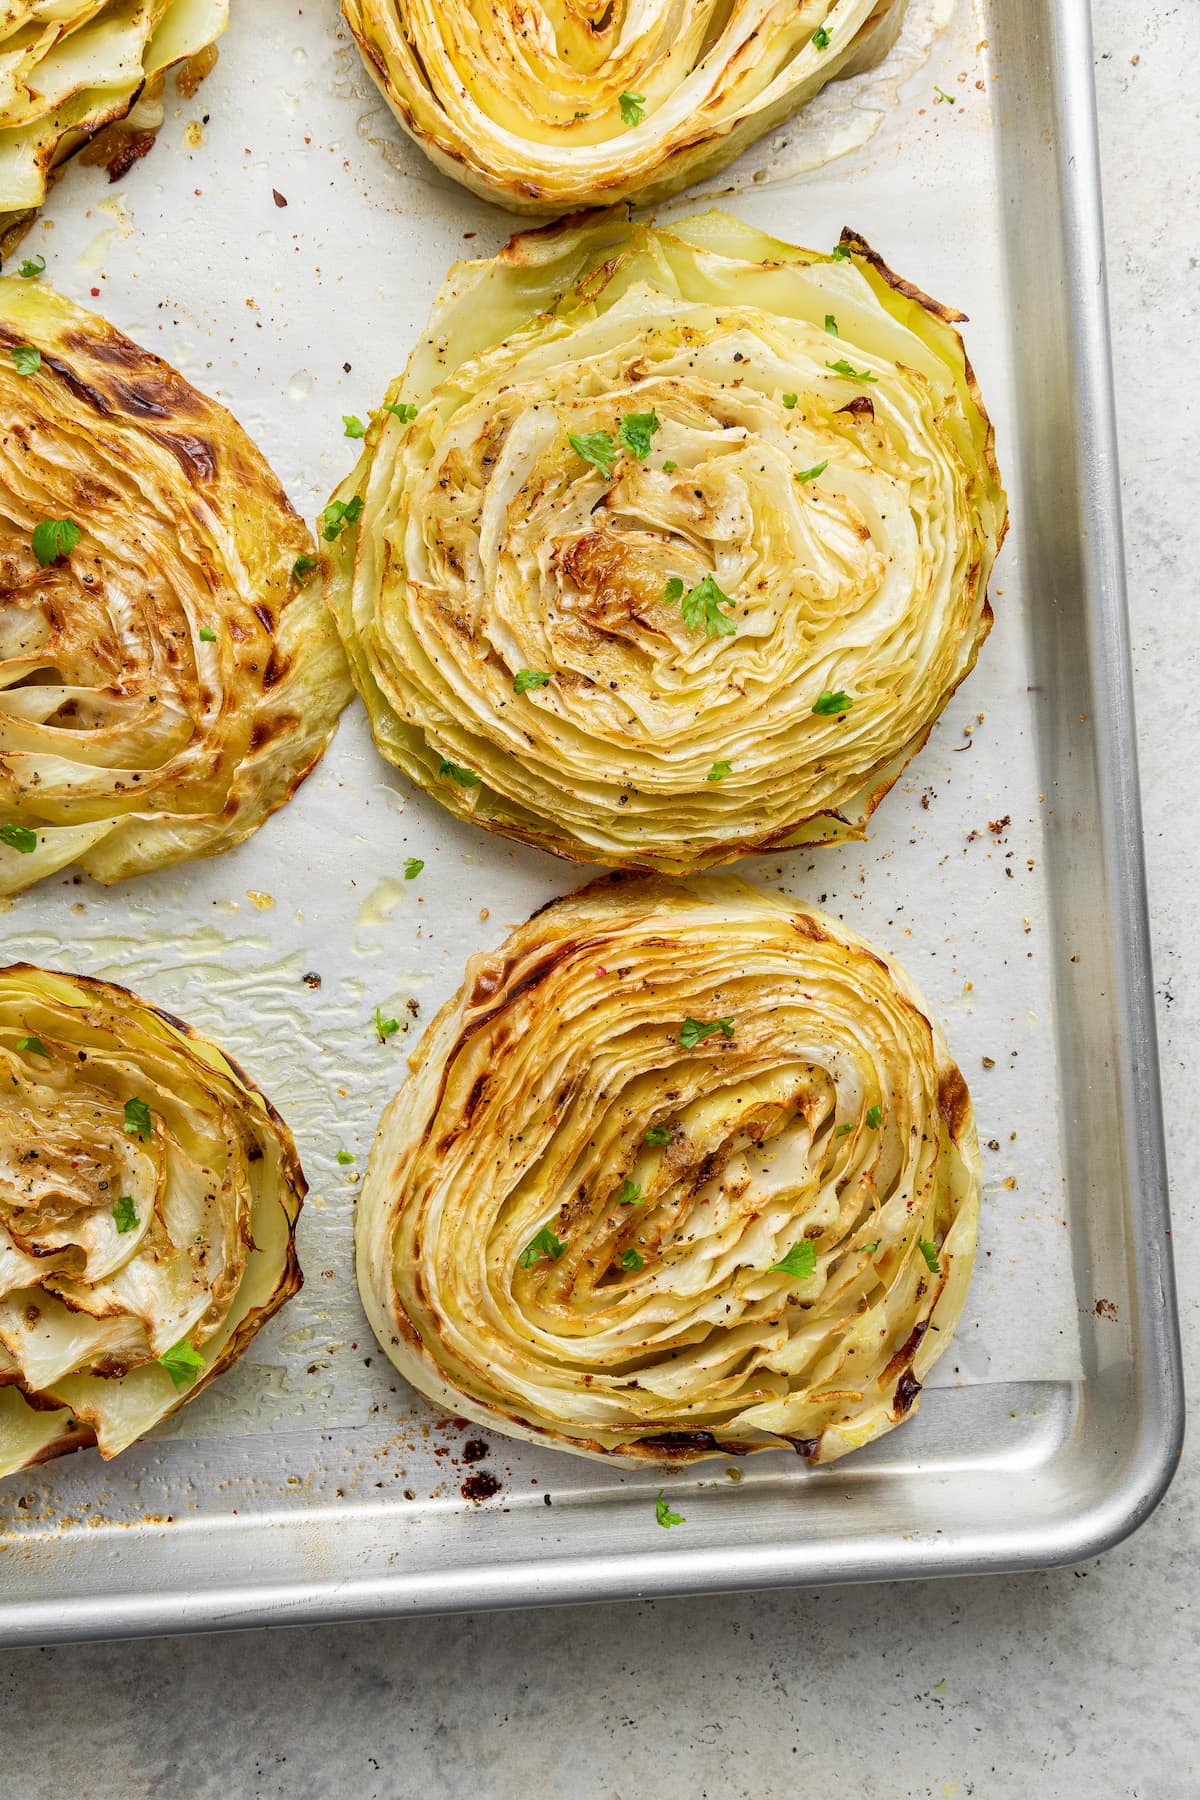 Roasted cabbage on a baking pan.